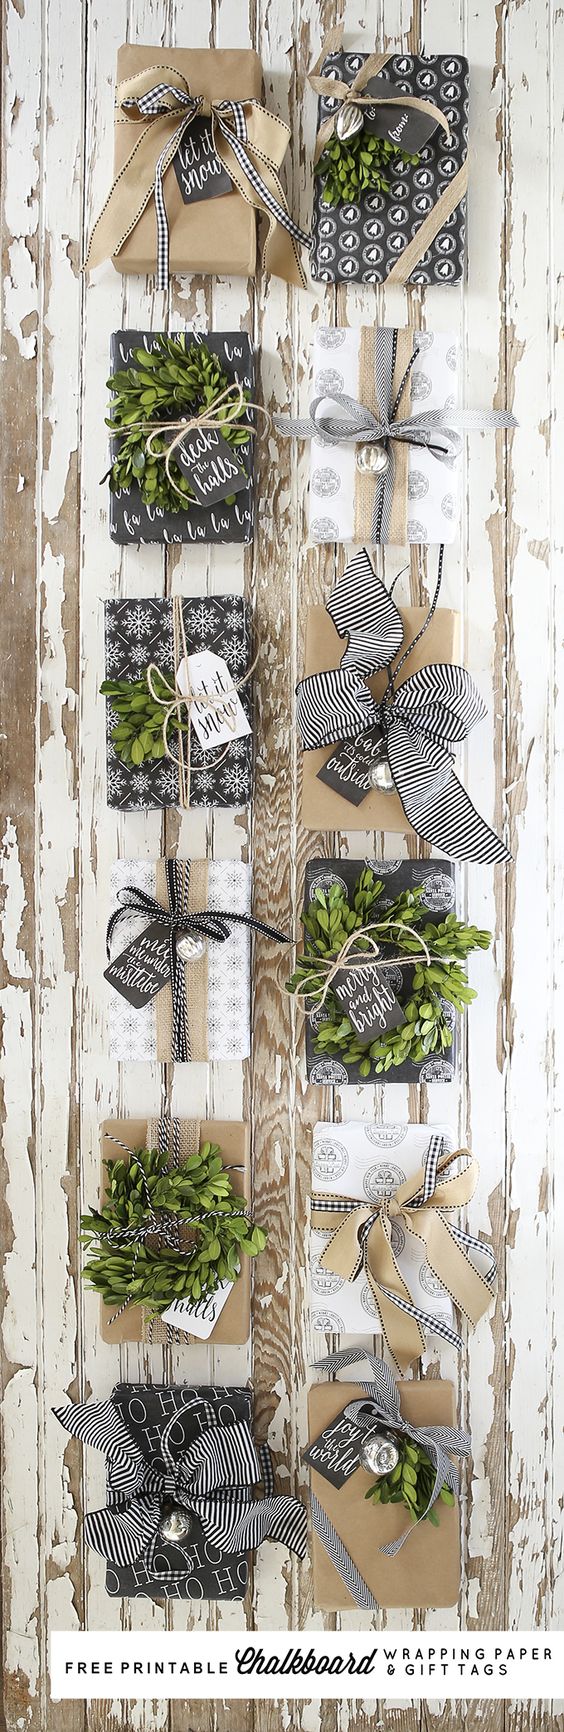 Free Printable Chalkboard Wrapping Paper and Gift Tags